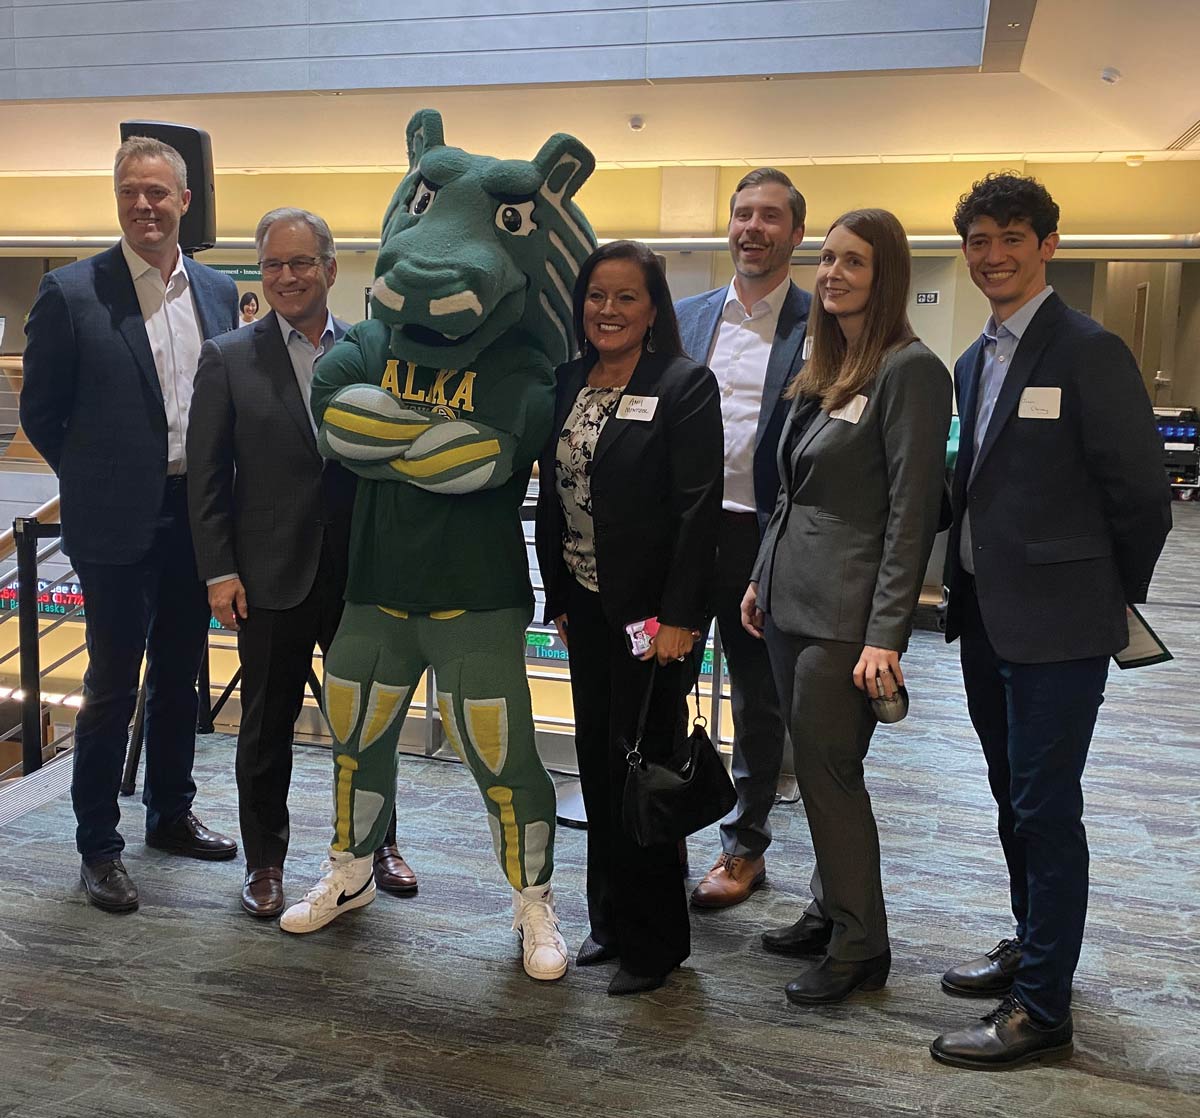 members of team McKinley and UAA standing in UAA's College of Business and Public Policy